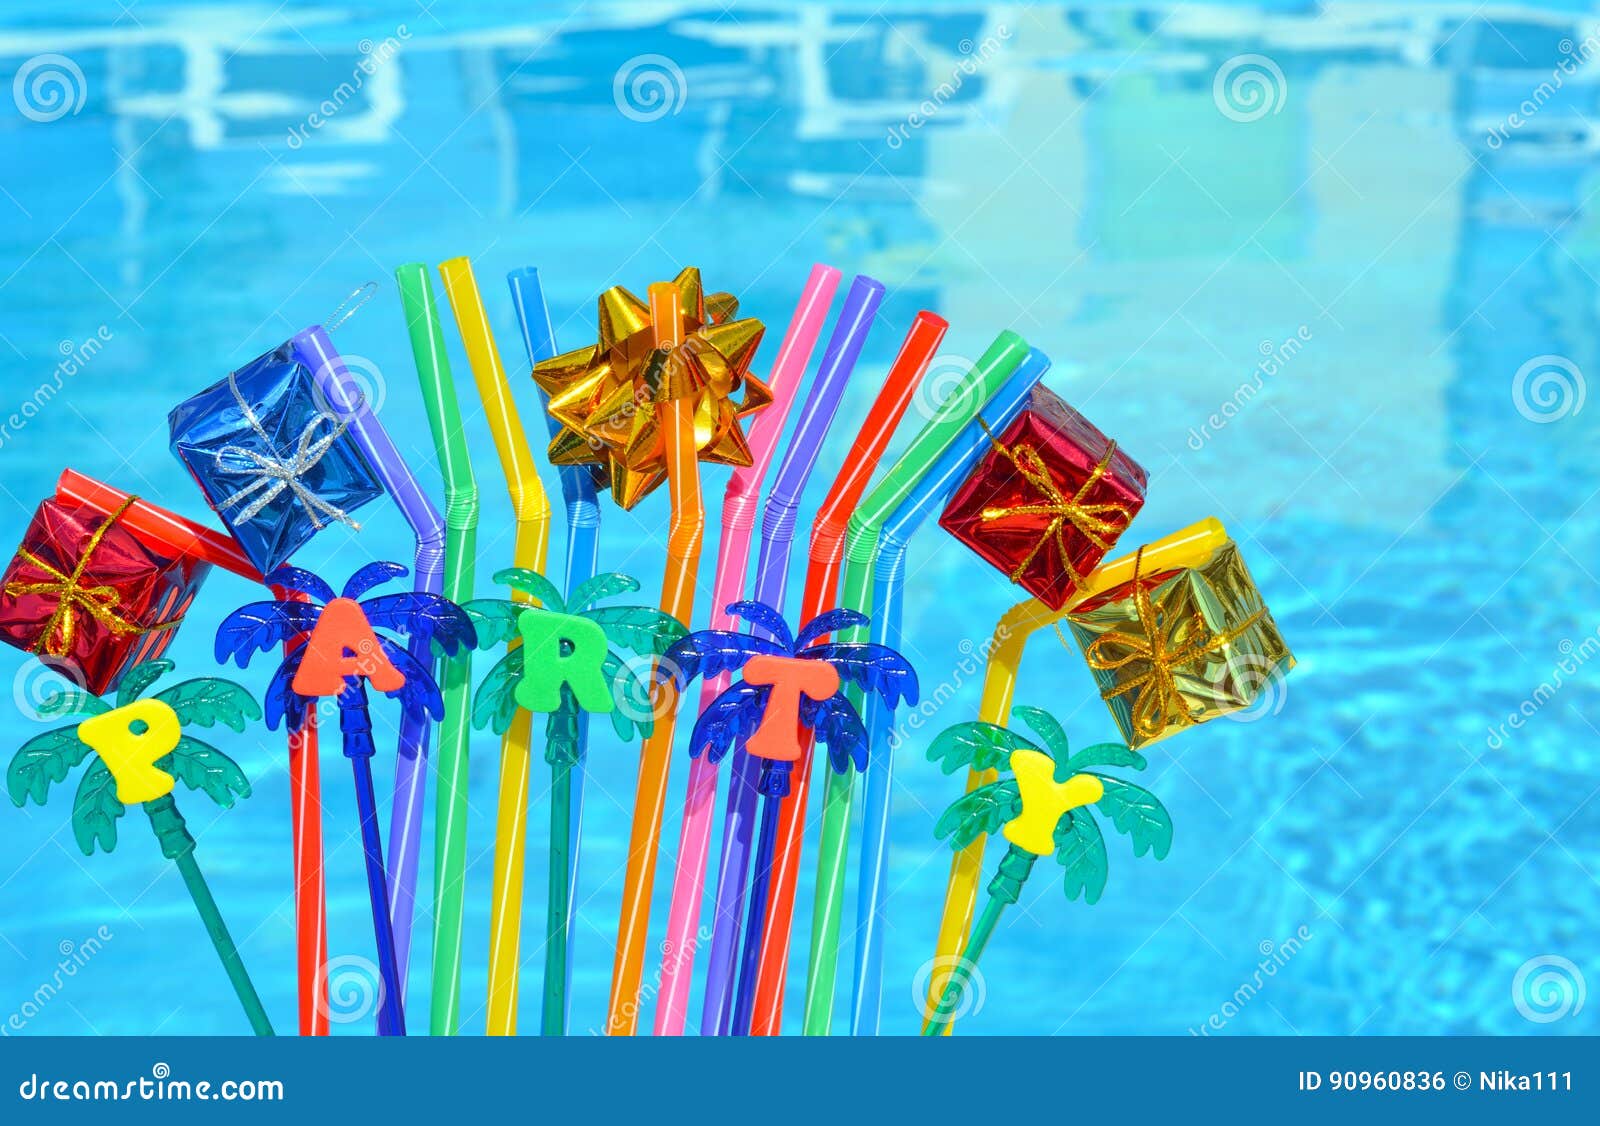 Pool Party Backdrop Summer Beach Pool Party Decorations 